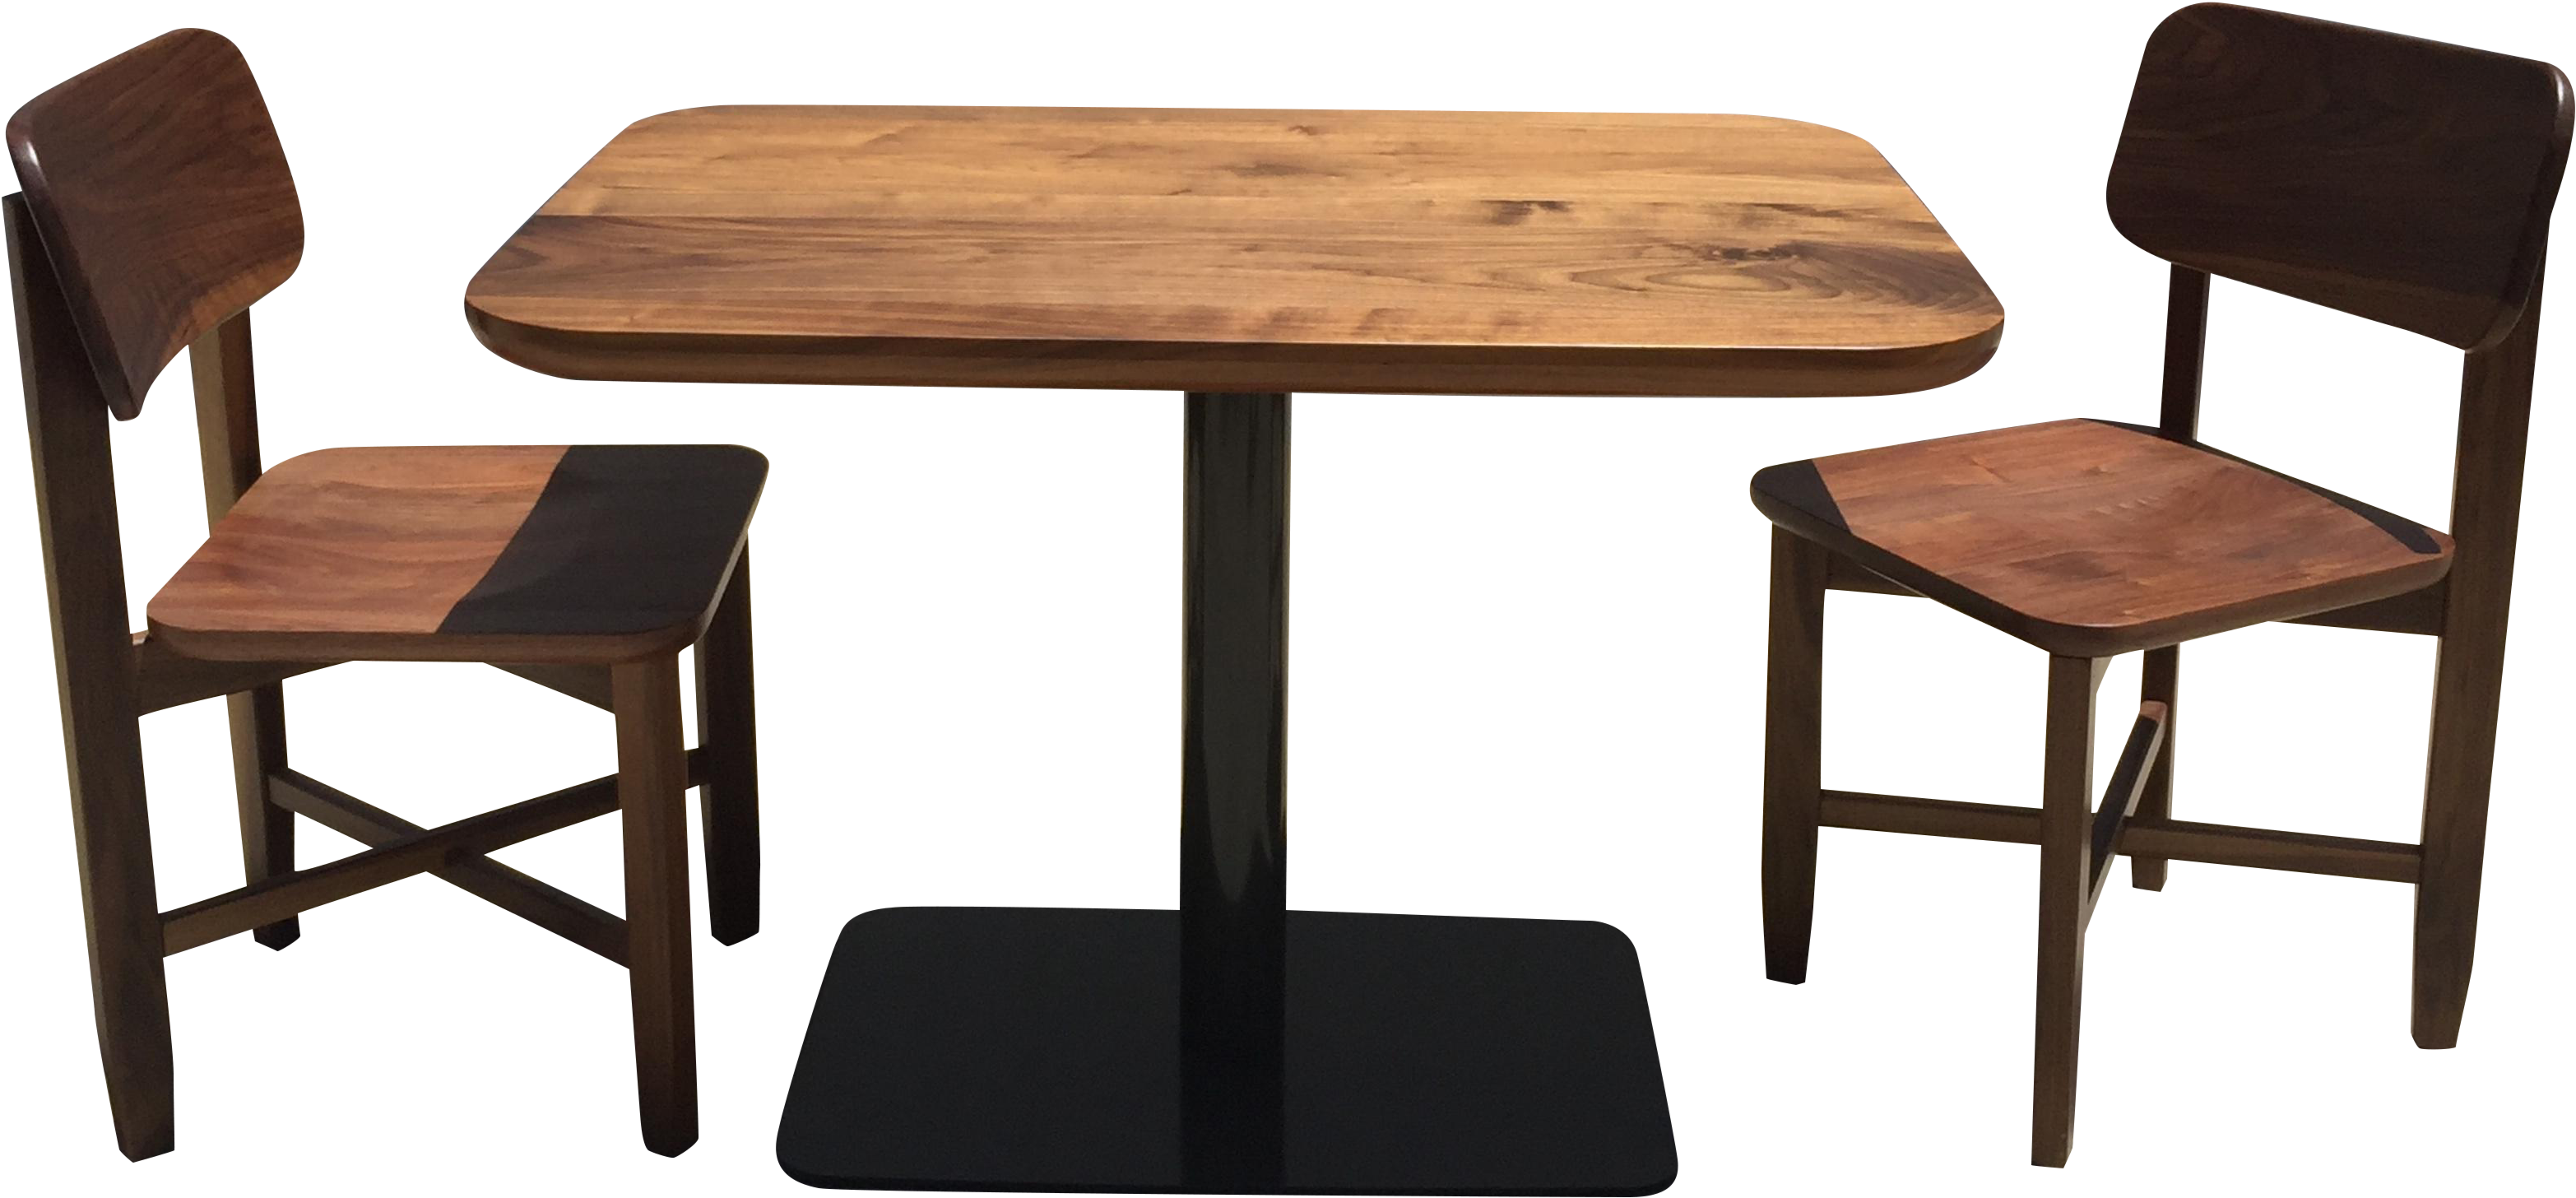 background, kitchen table, coffee Transparent PNG Photoshop